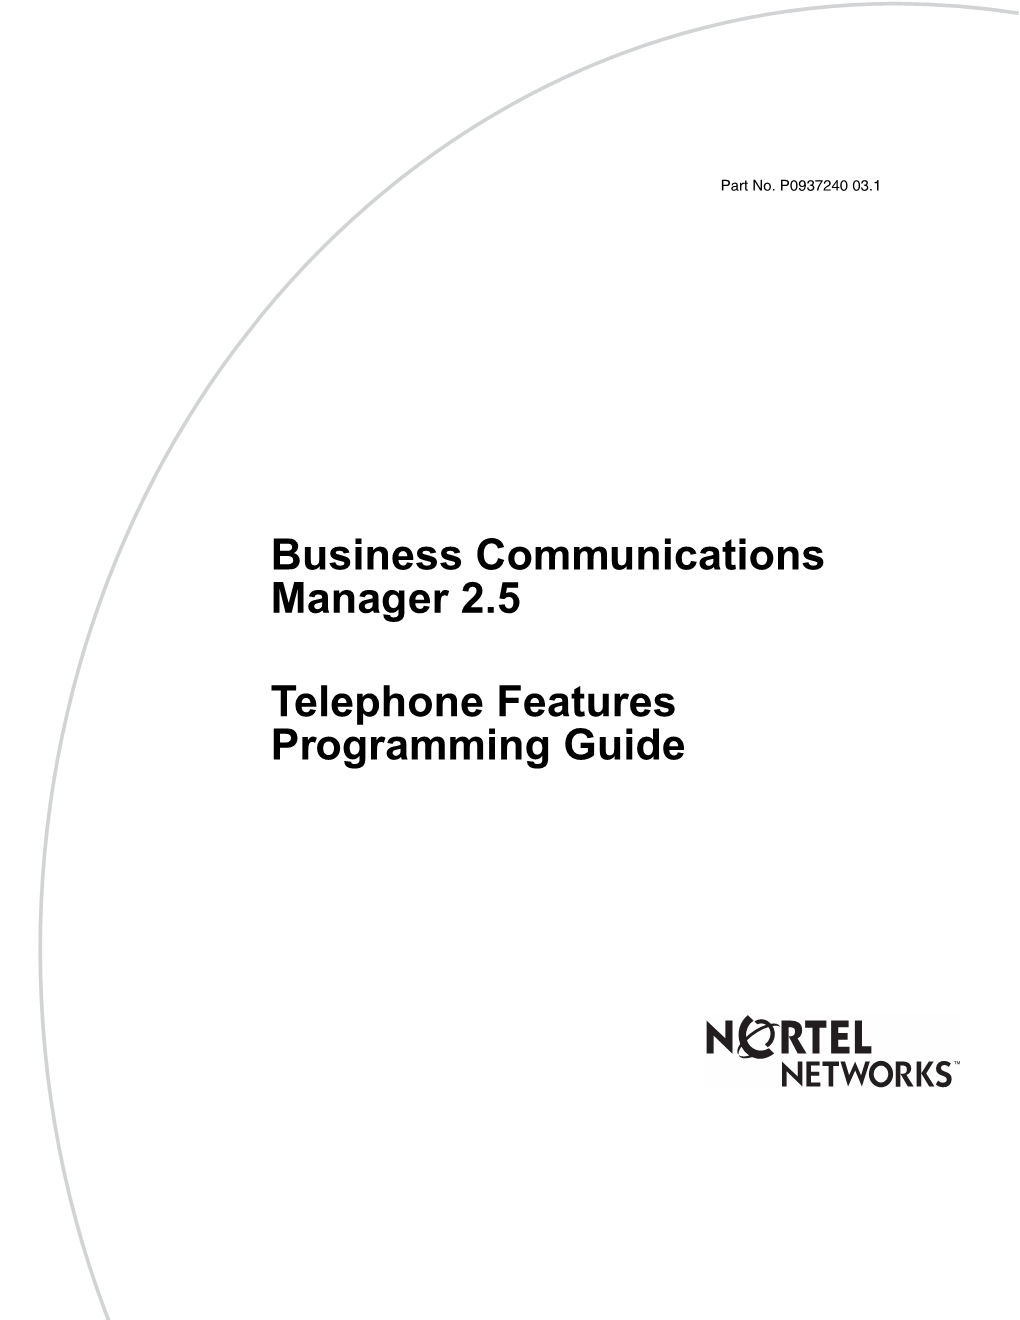 Telephone Features Programming Guide 2 Copyright © 2002 Nortel Networks